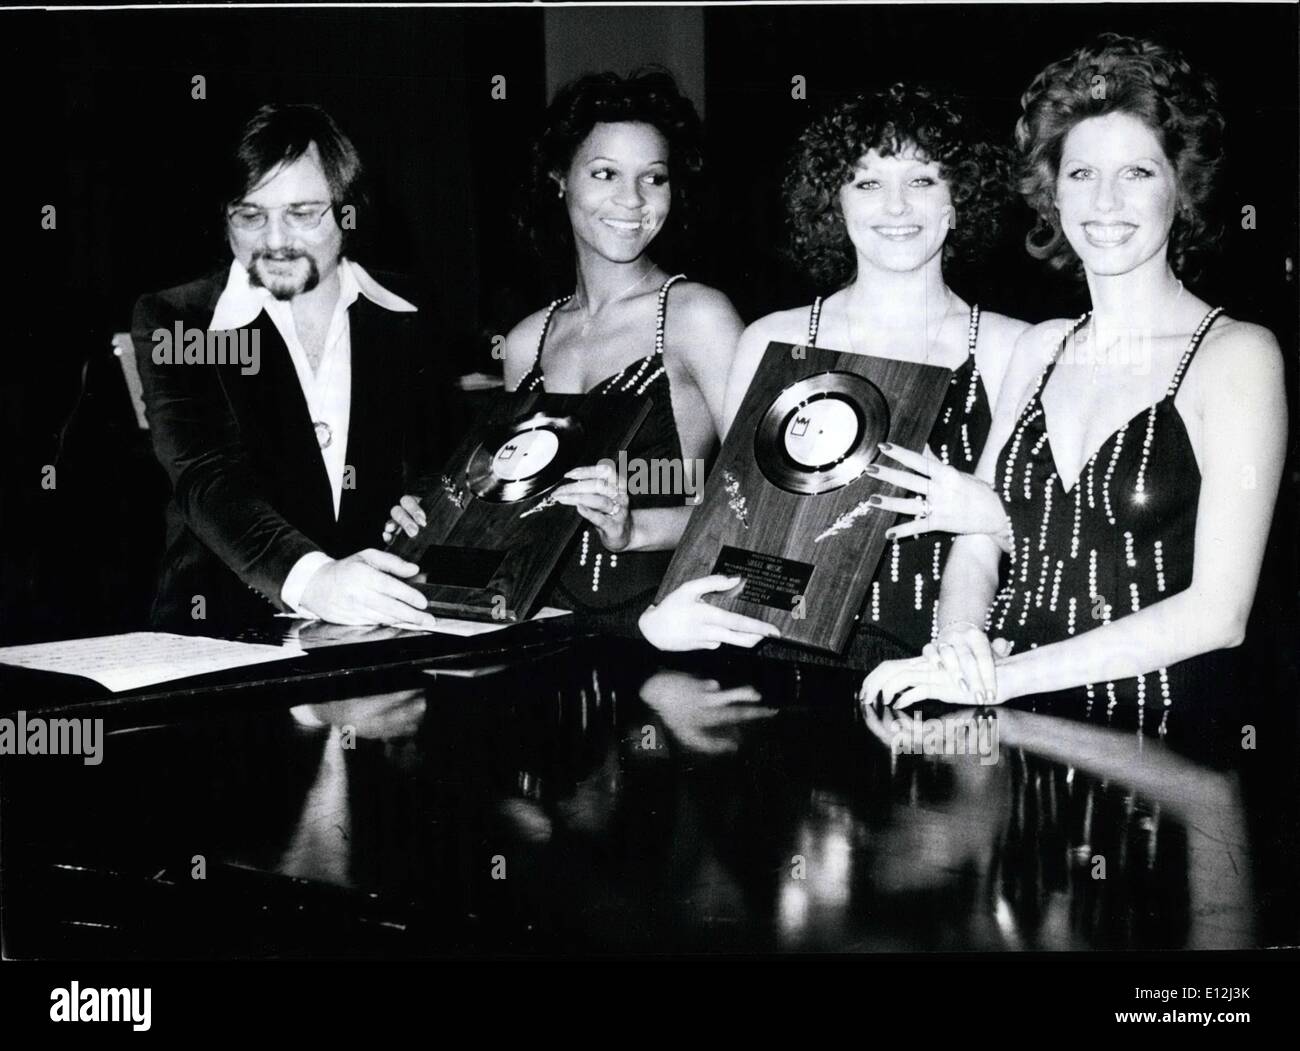 Feb. 24, 2012 - For The First Time A German Group With English Record The ''Number One'' In The United States: Golden records were recently awarded to Silvester Levay (composer, arranger and conductor) and his group Silver Convention'' (picture). The singers Ramona, Linda and Penny started their joint career in January 1975 and it took them not even a year to reach the top. Their first single ''Save Me'' became nr. 1 on US ''Top 100'' and reached the 30th place on Great Britain's hit parade Stock Photo